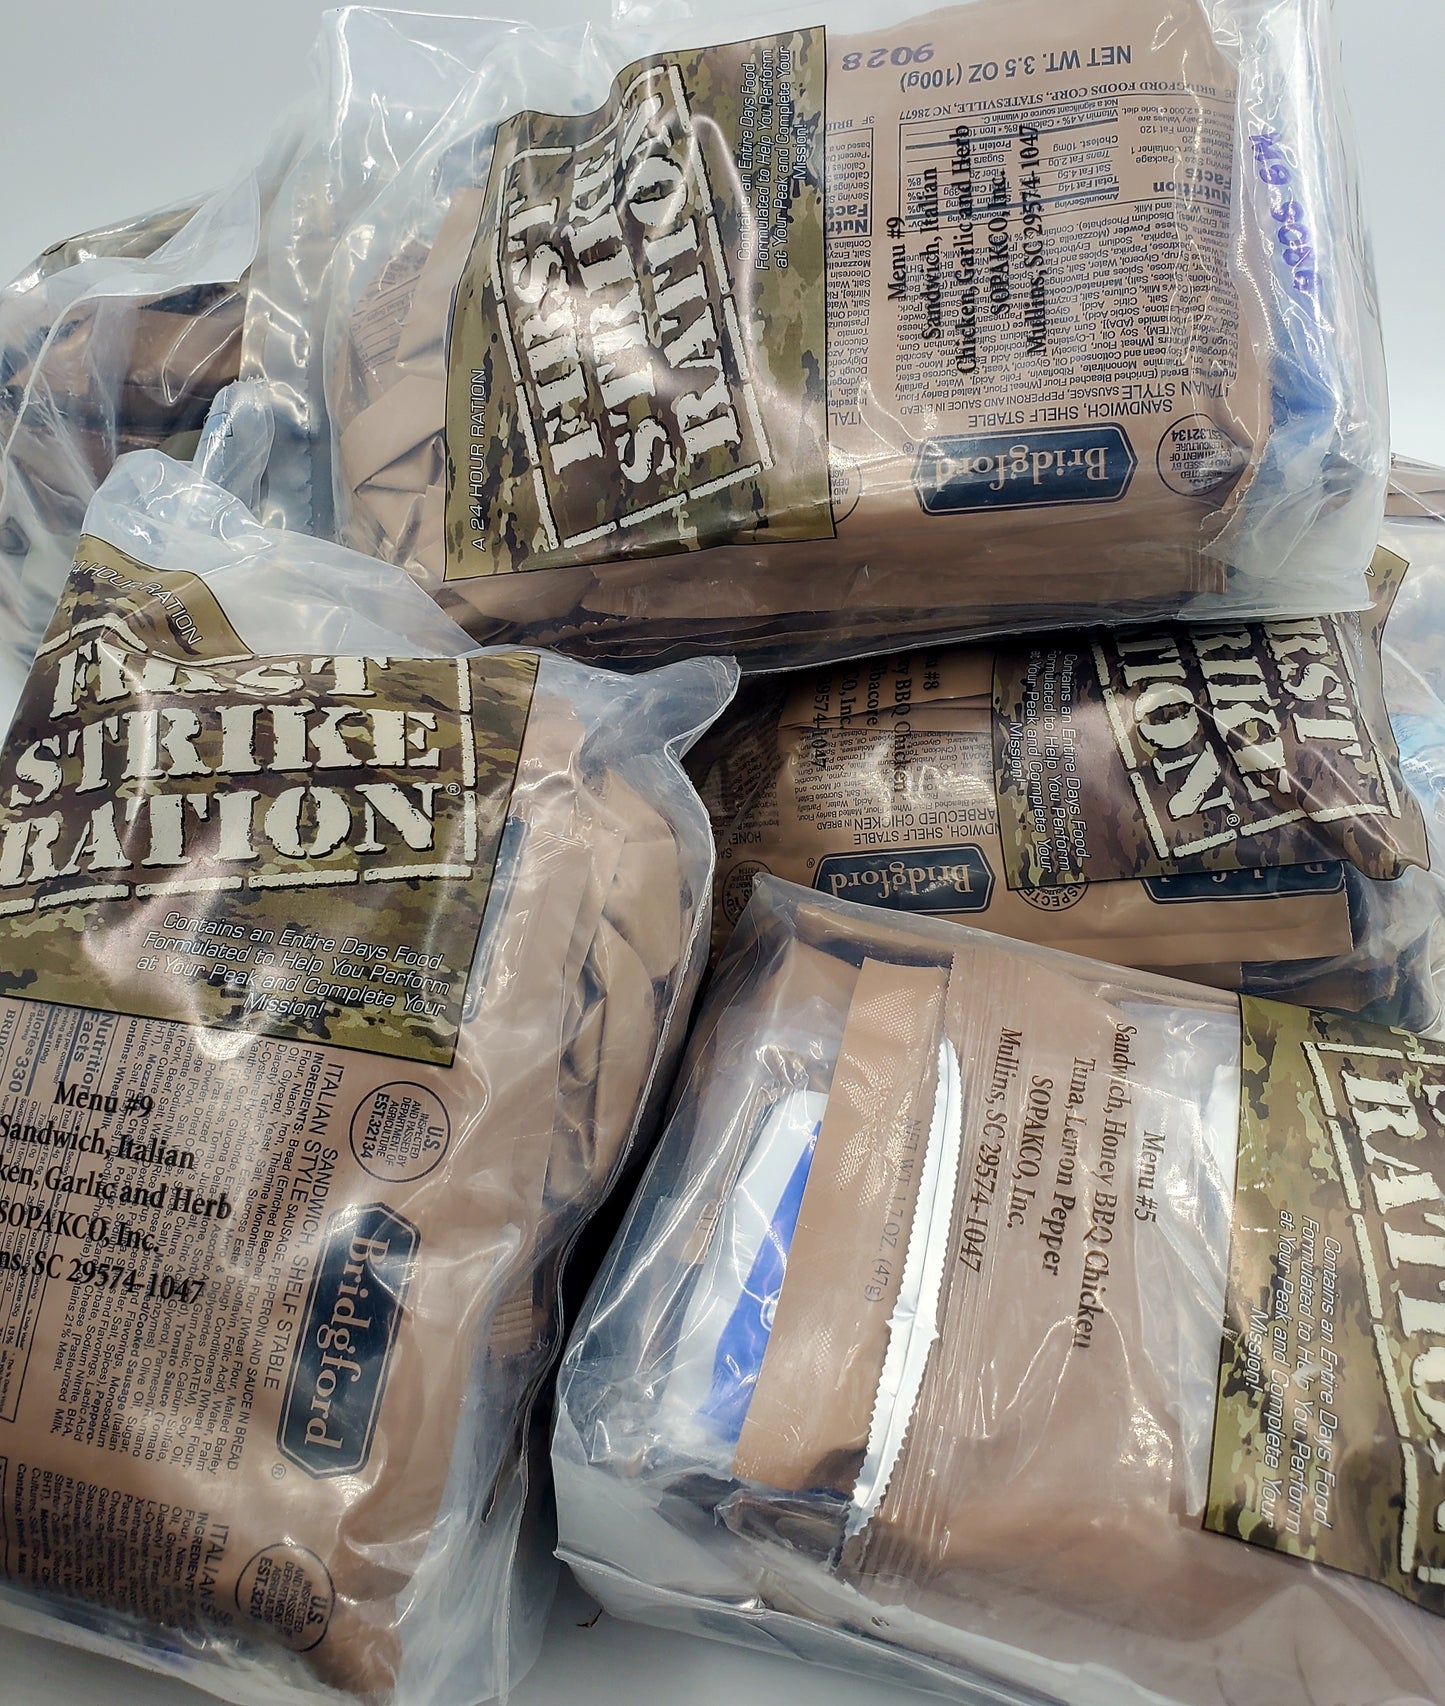 FIRST STRIKE RATION 1-9 **MYSTERY** MEAL